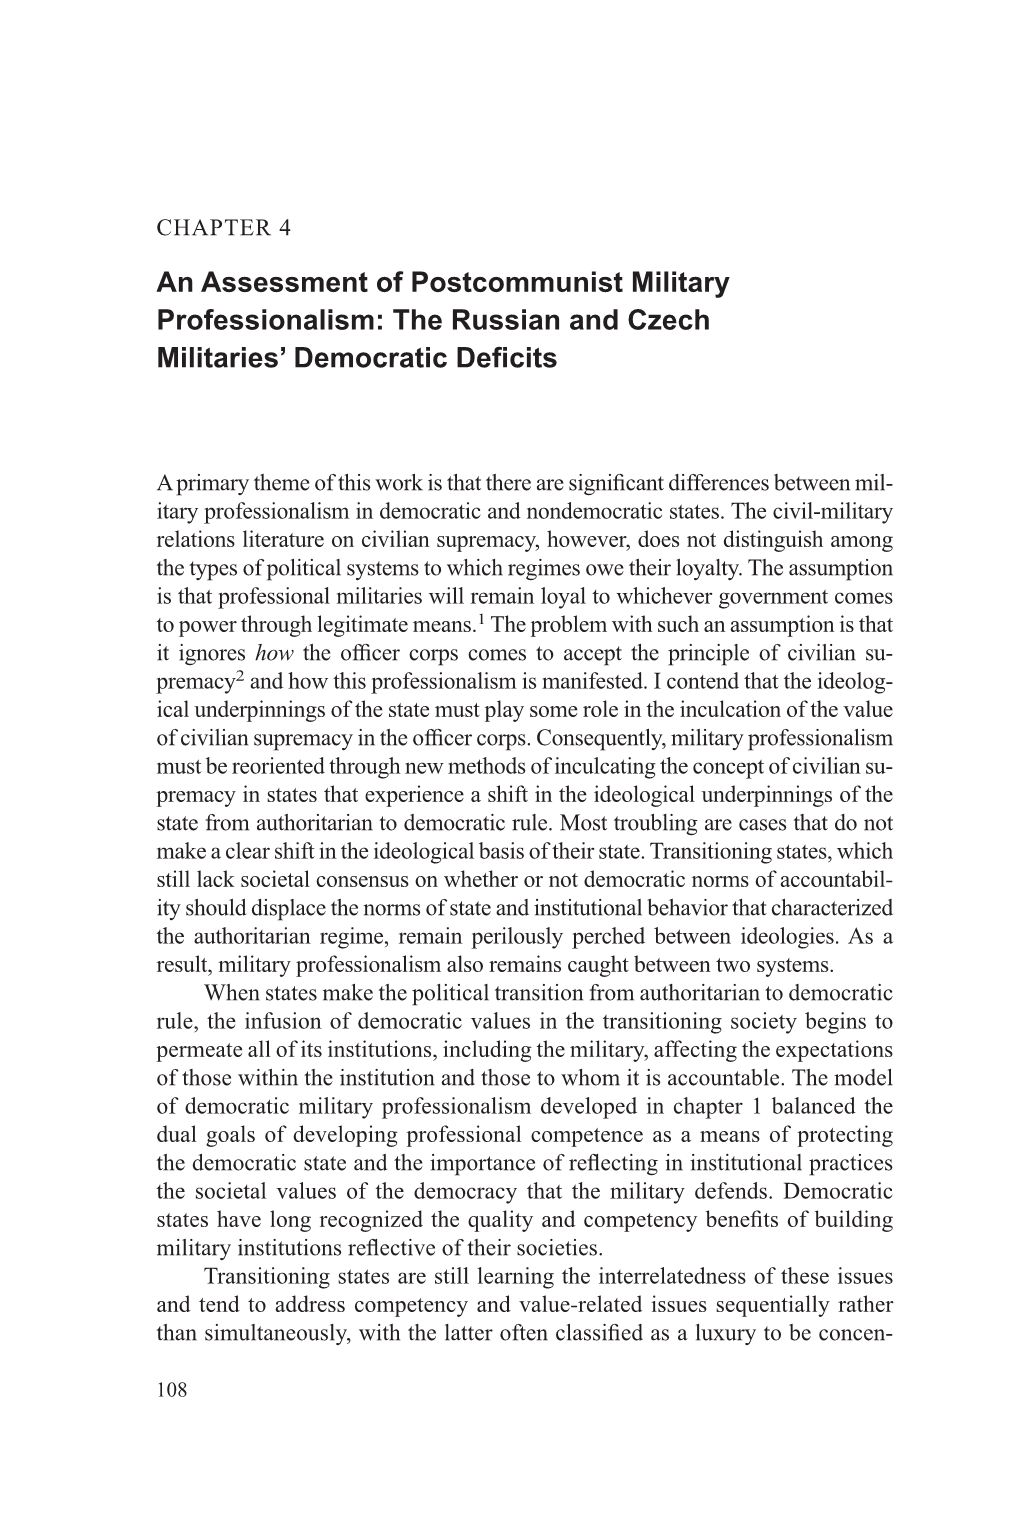 An Assessment of Postcommunist Military Professionalism: the Russian and Czech Militaries’ Democratic Deﬁcits